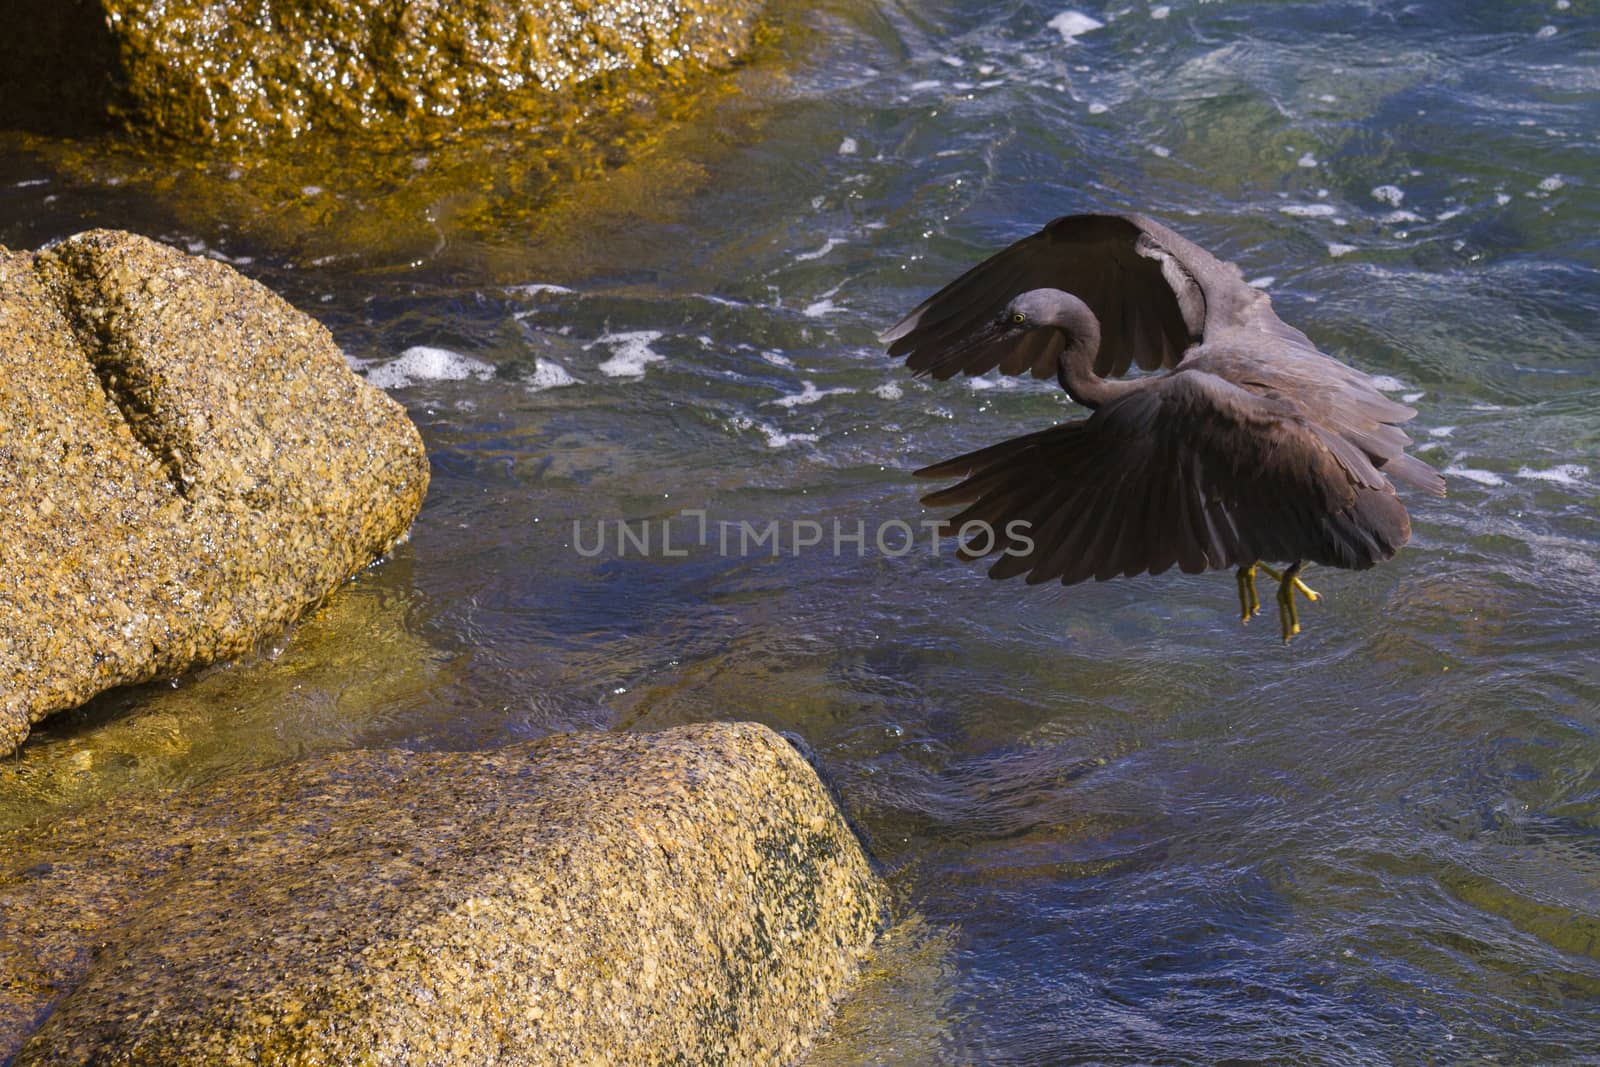 pacific reef egret, black pacific reef egret looking for fish at by jee1999